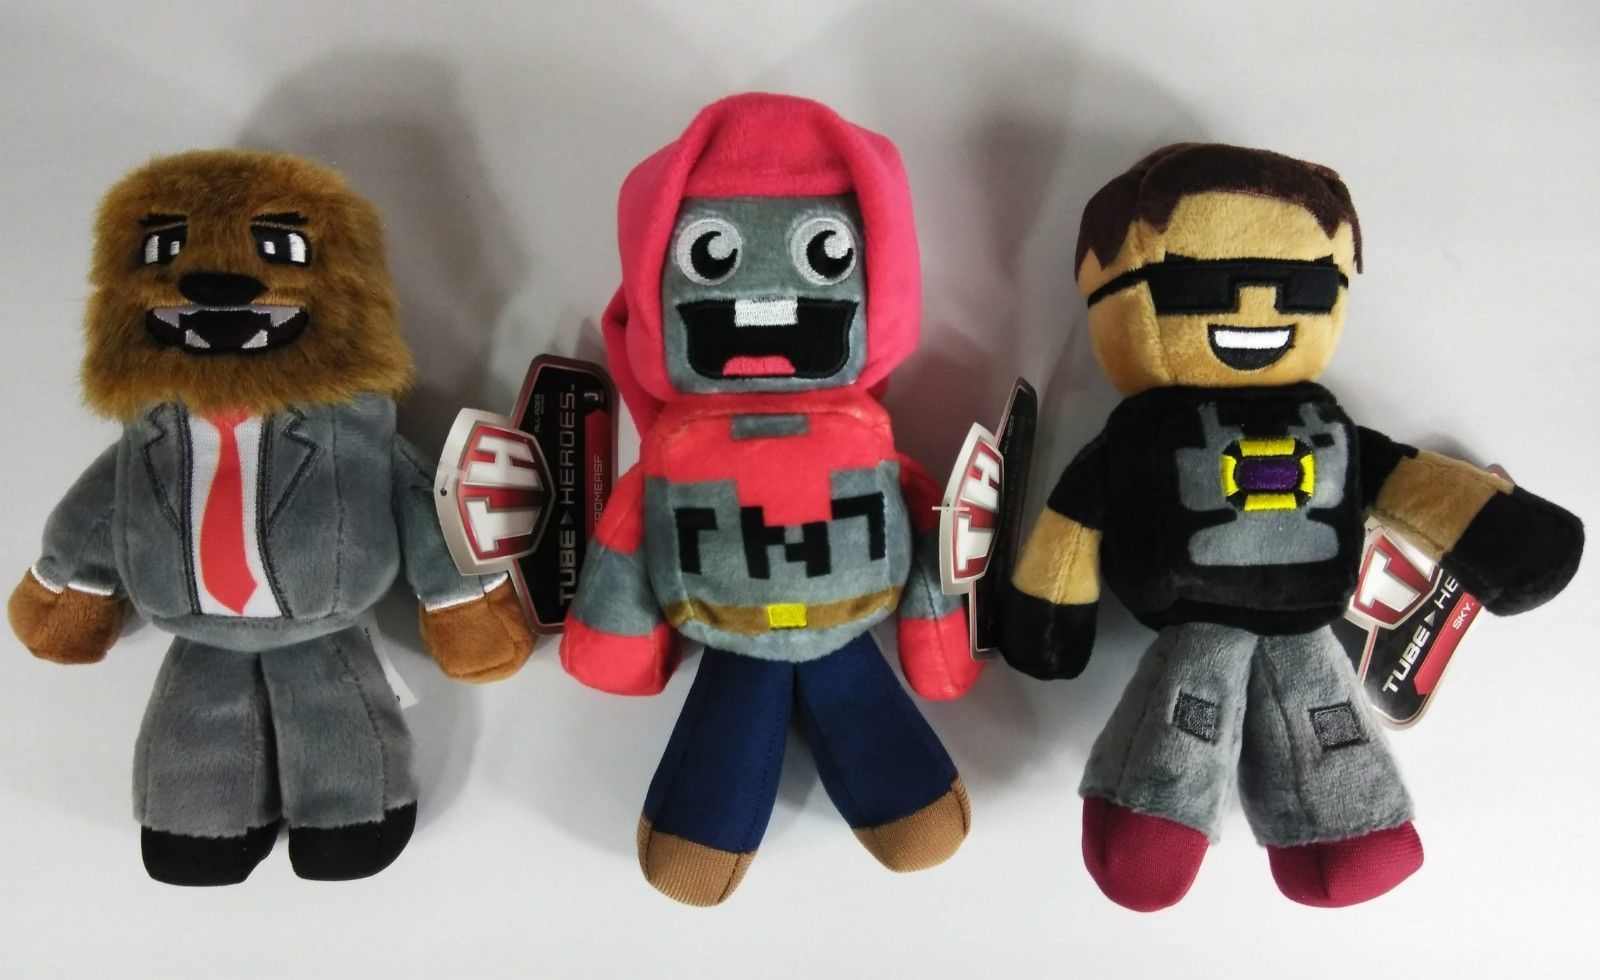 New Lot Of 3 Tube Hero Plush Toys Jerome And 25 Similar Items - can we be friends dan tdm roblox